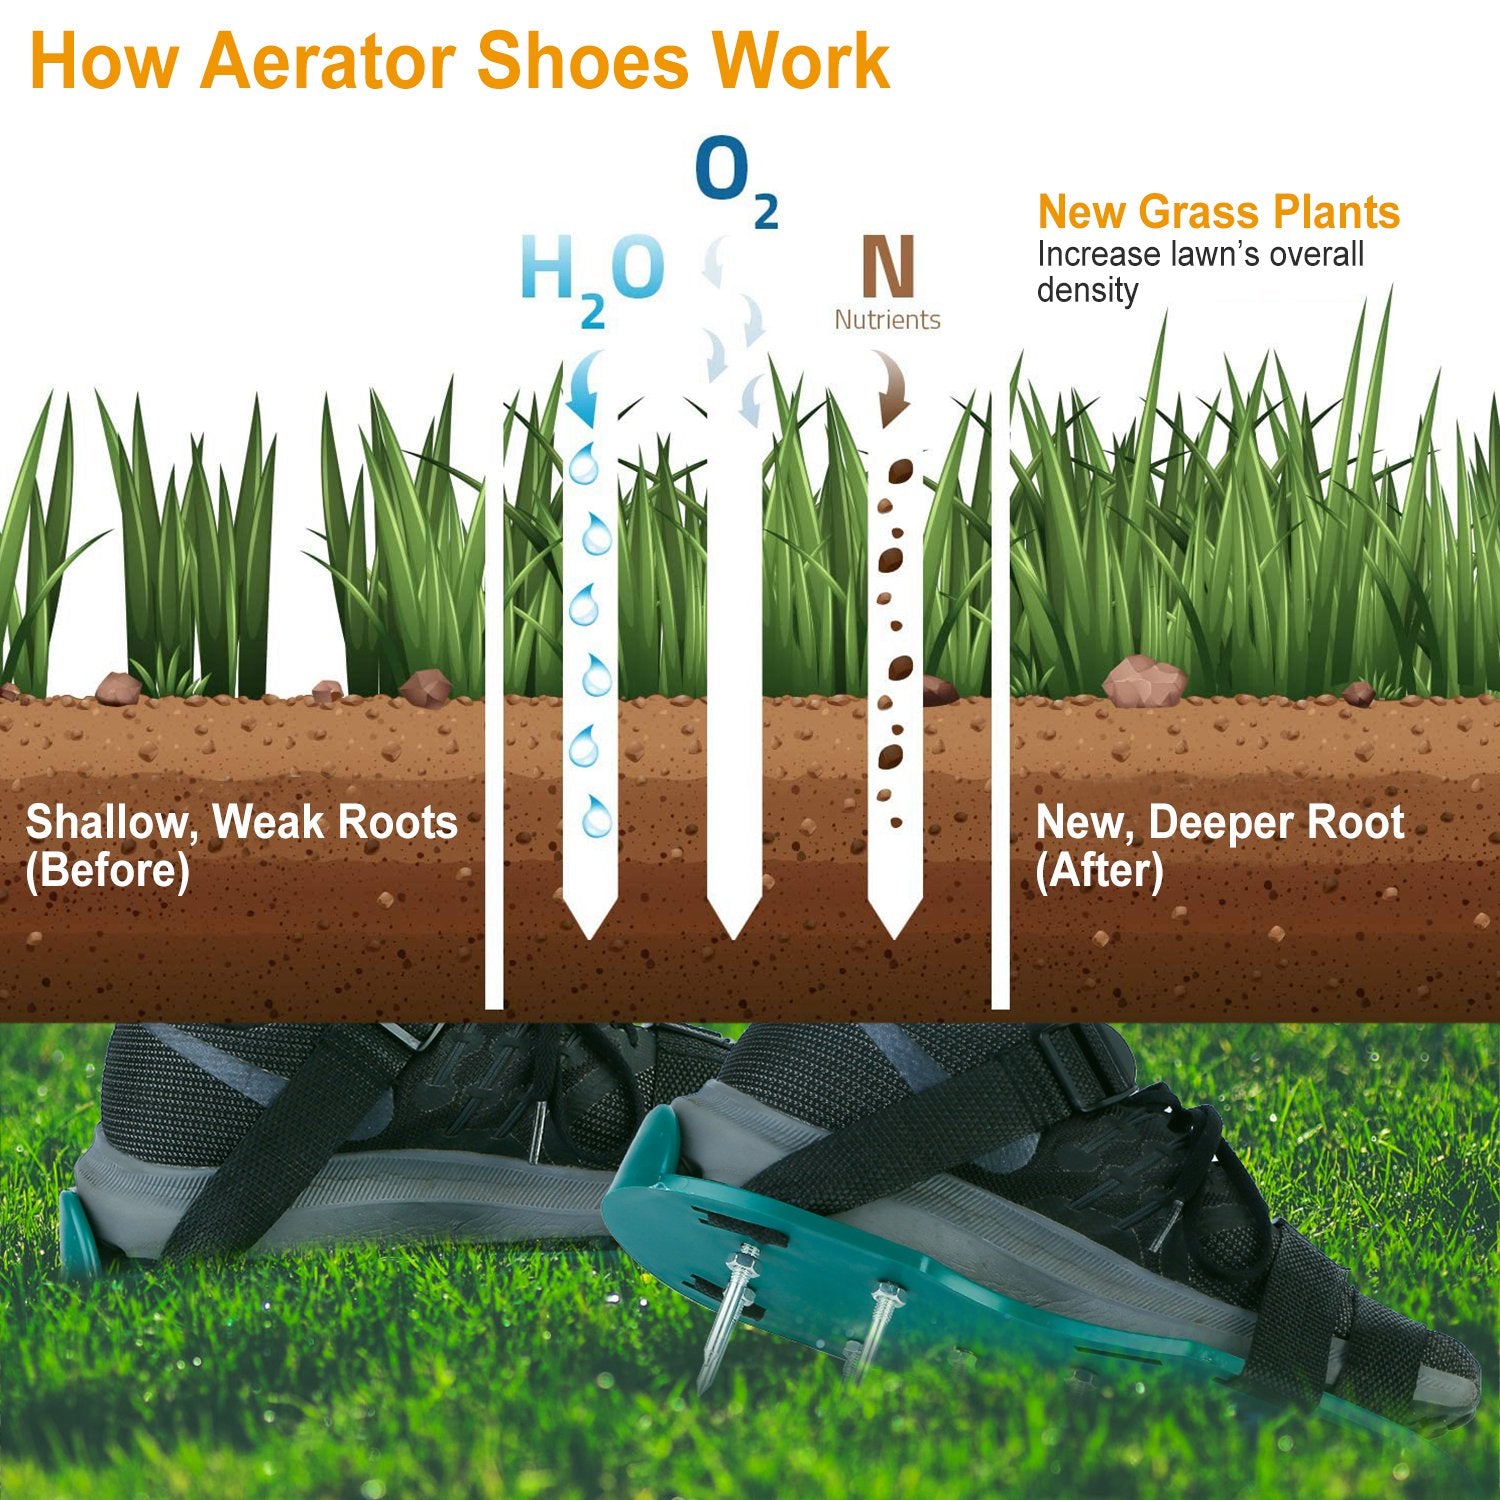 iMounTEK 1Pair Lawn Aerator Shoes Grass Aerating Spike Sandal Heavy Duty Aerator Shoes w/ Adjustable Straps for Lawn Garden